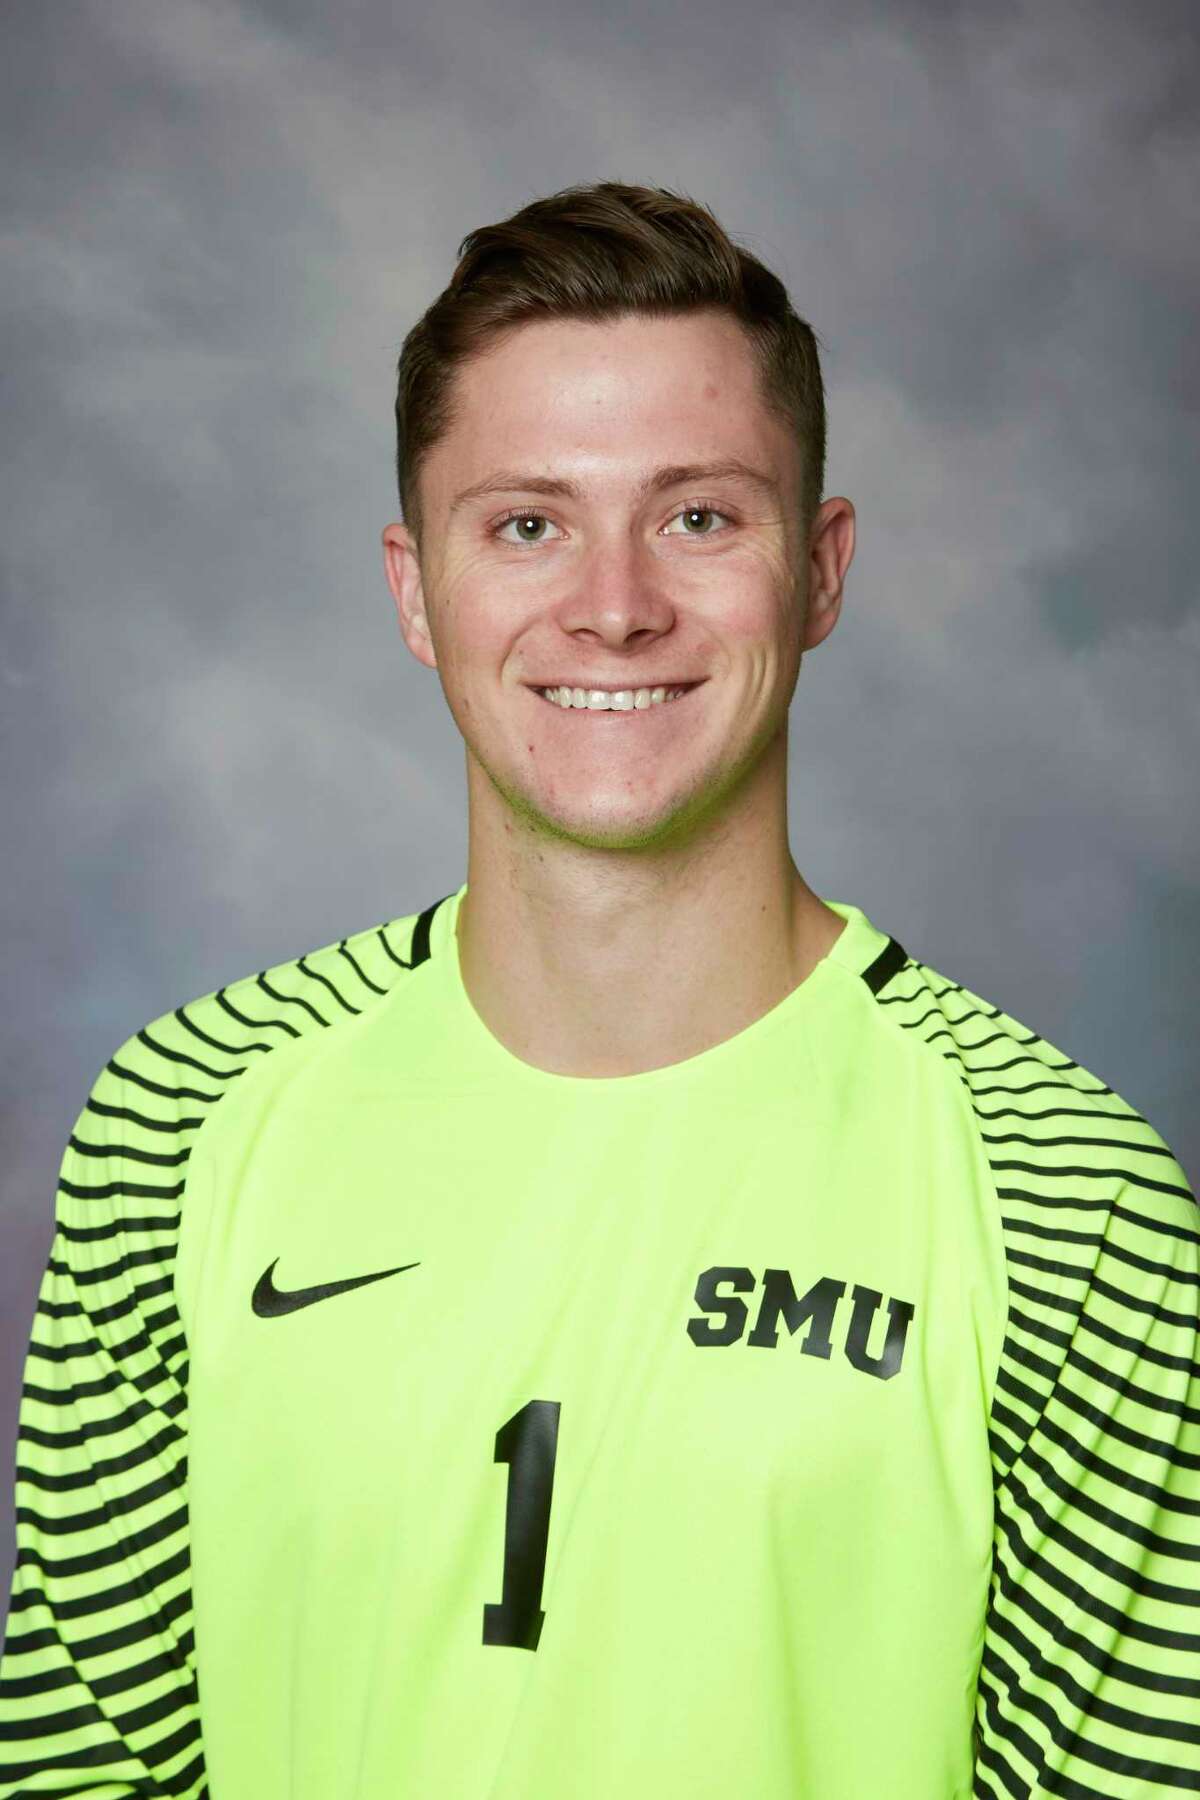 Seven Lakes graduate Michael Nelson is a four-year starting goalkeeper at SMU, winning American Athletic Conference Goalkeeper of the Year as a freshman and sophomore. He led the Spartans to their first district title and regional tournament.